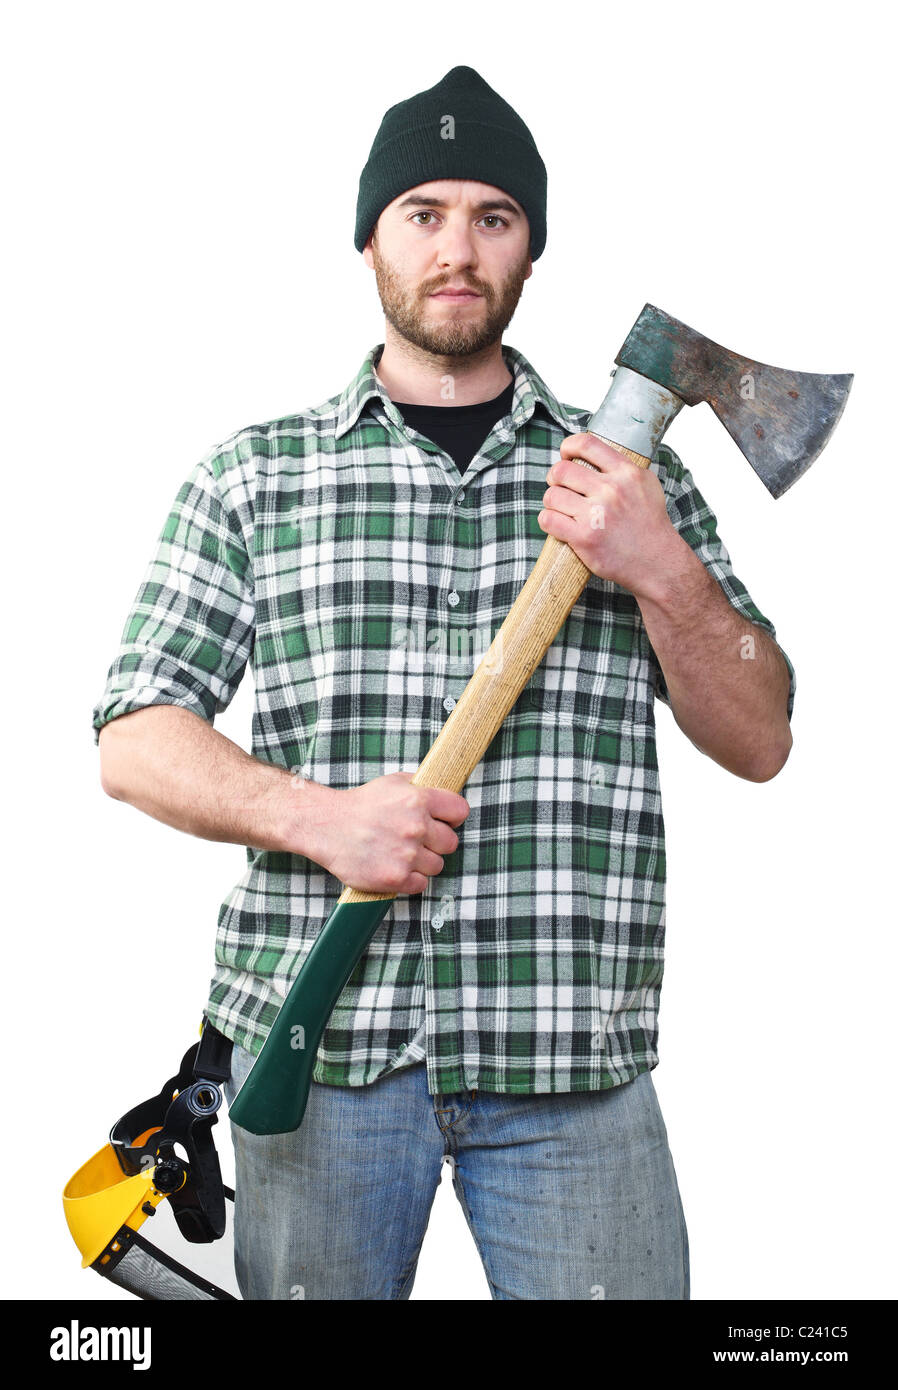 fine portrait of young caucasian lumberjack with axe Stock Photo